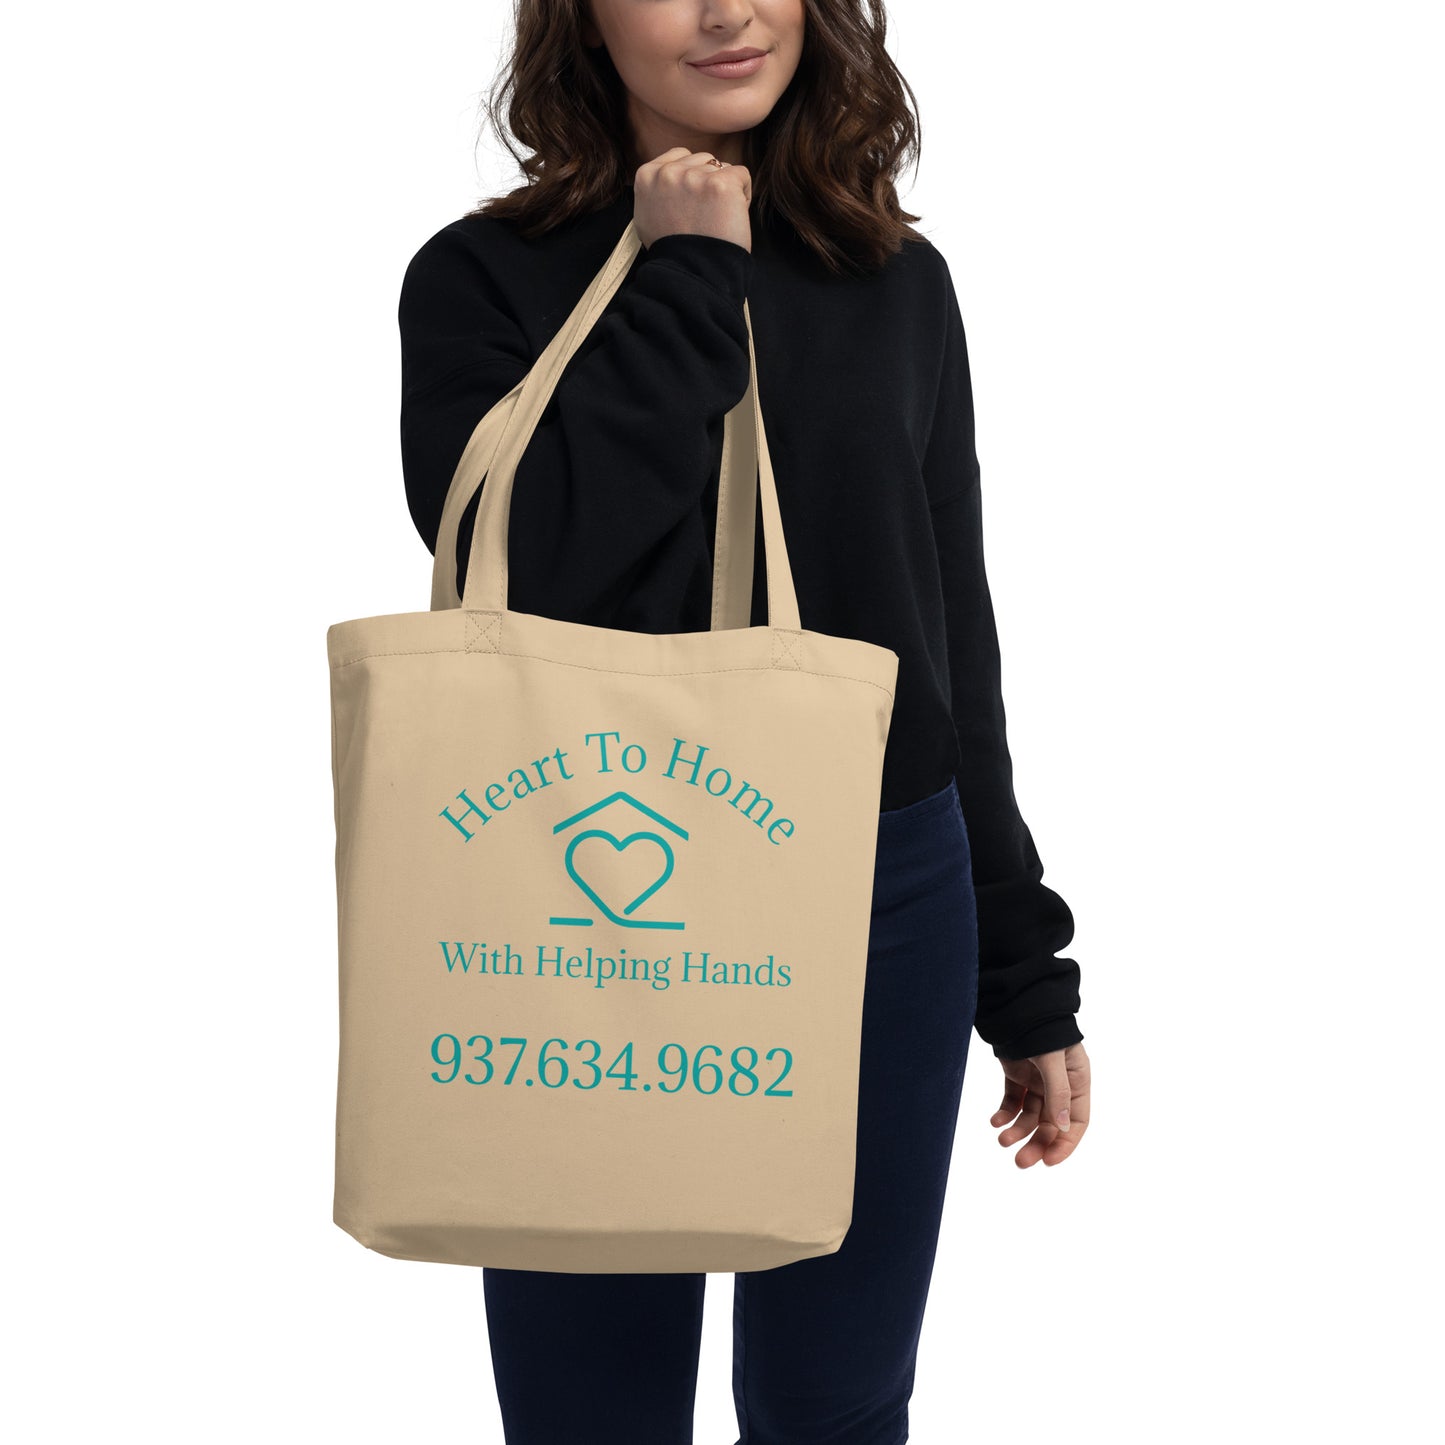 Cotton Tote Bag - Heart To Home